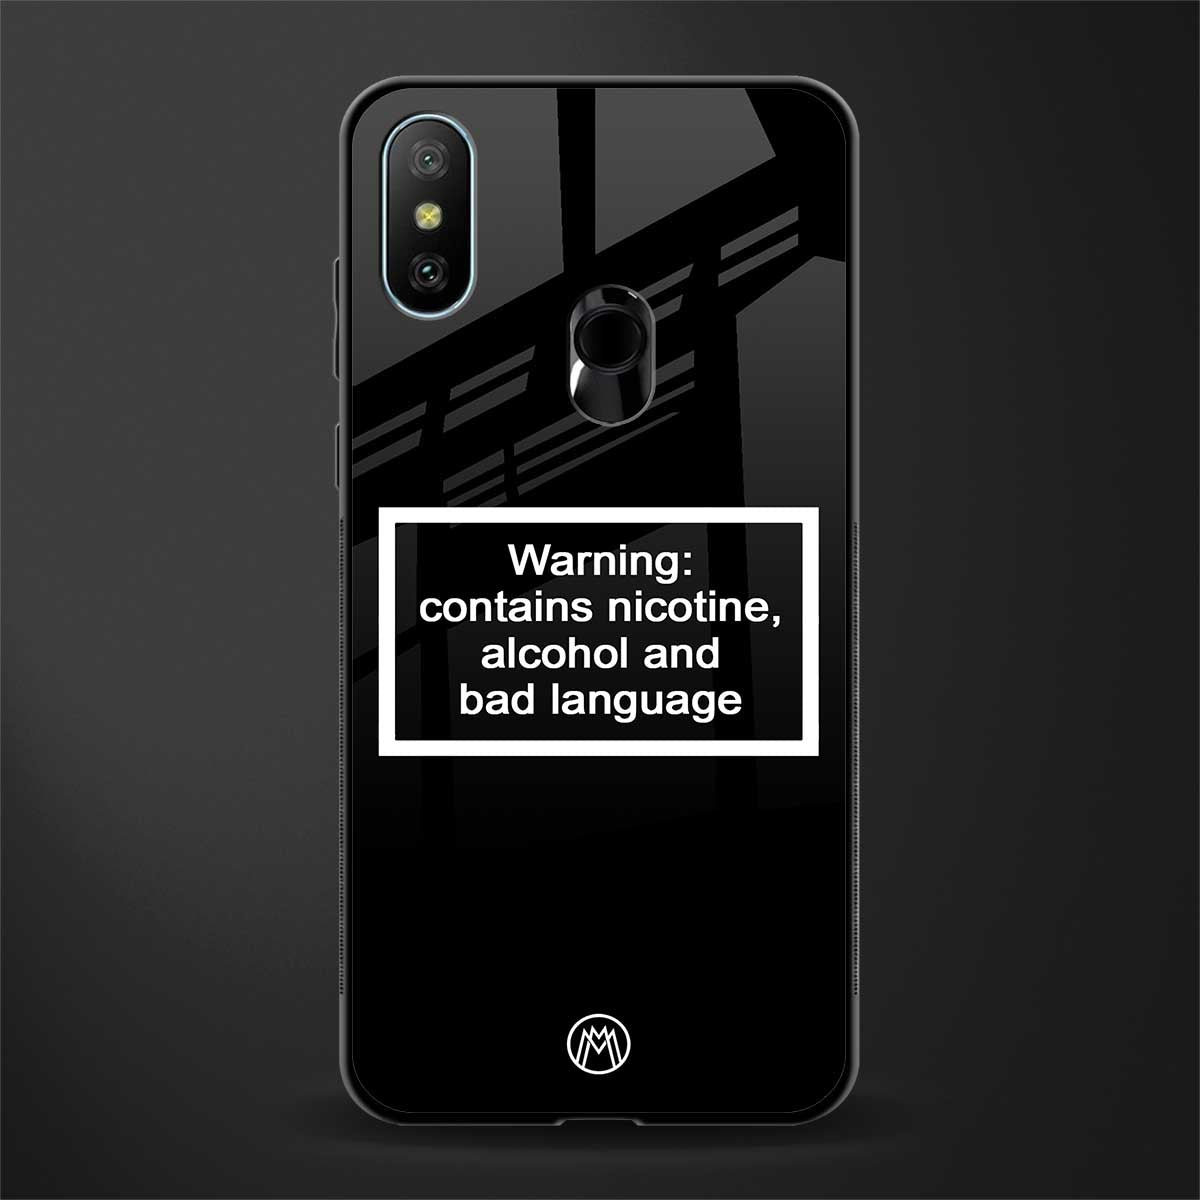 warning sign black edition glass case for redmi 6 pro image